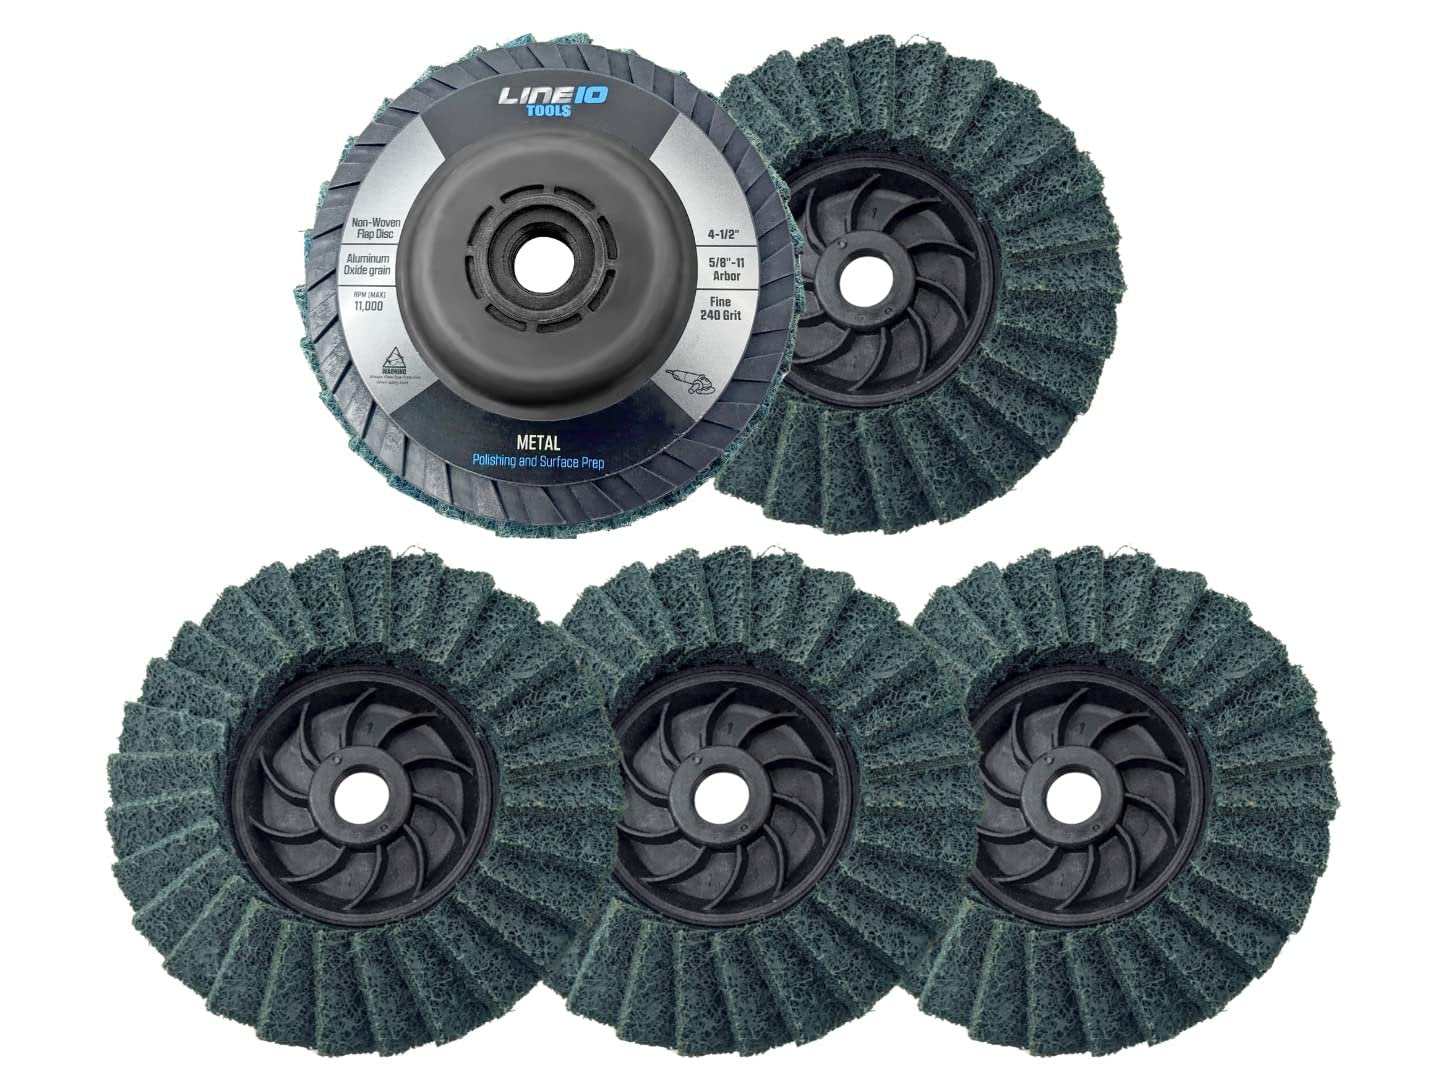 5pk Green Non-Woven Abrasive Flap Disc 4-1/2" with 5/8-11 Threaded Arbor for Angle Grinder